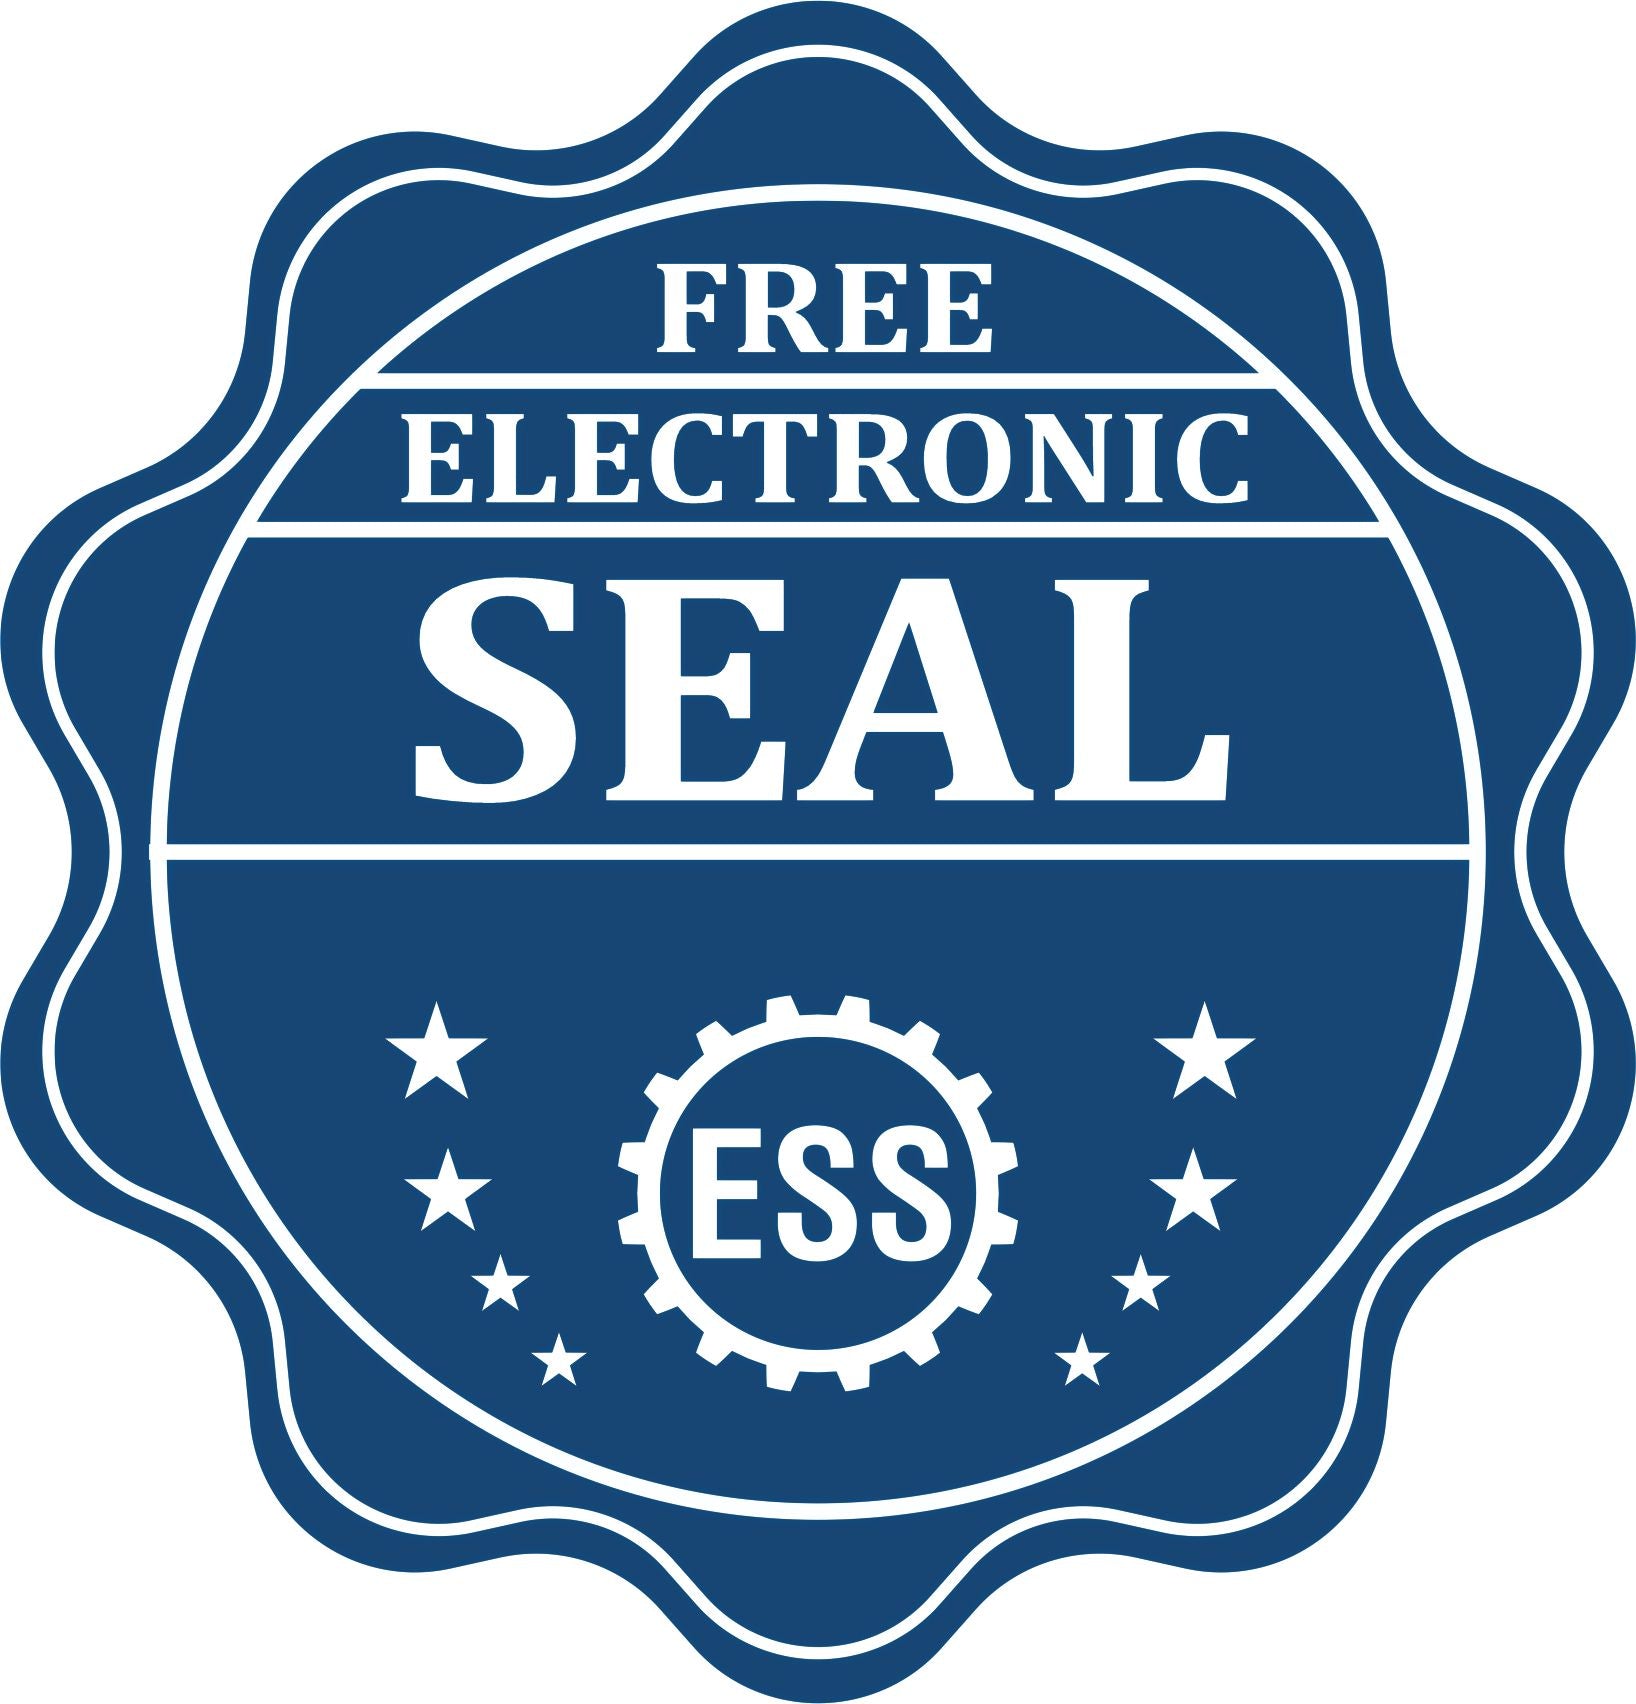 A badge showing a free electronic seal for the Illinois Professional Engineer Seal Stamp with stars and the ESS gear on the emblem.